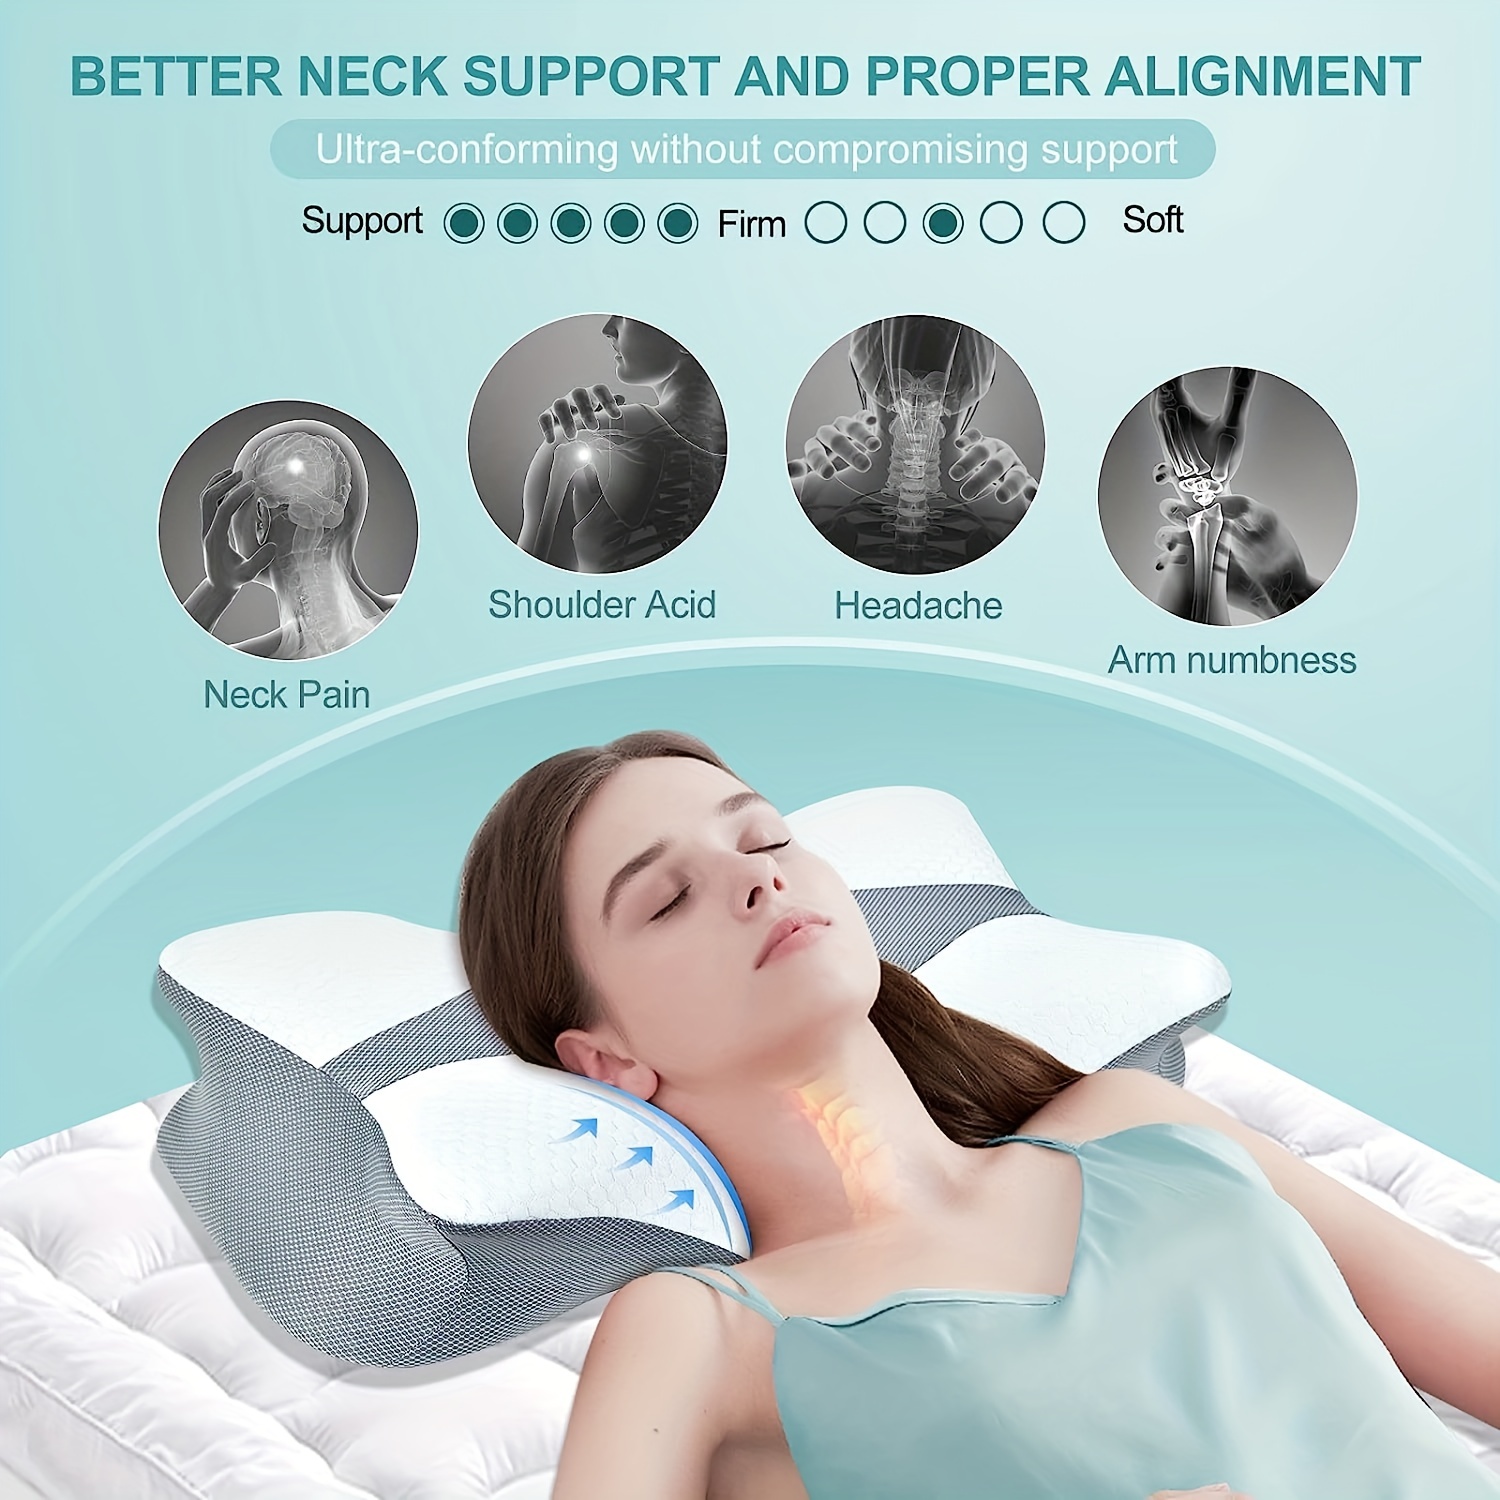 Cooling Memory Foam Pillow for Neck and Should Pain Relief, Neck